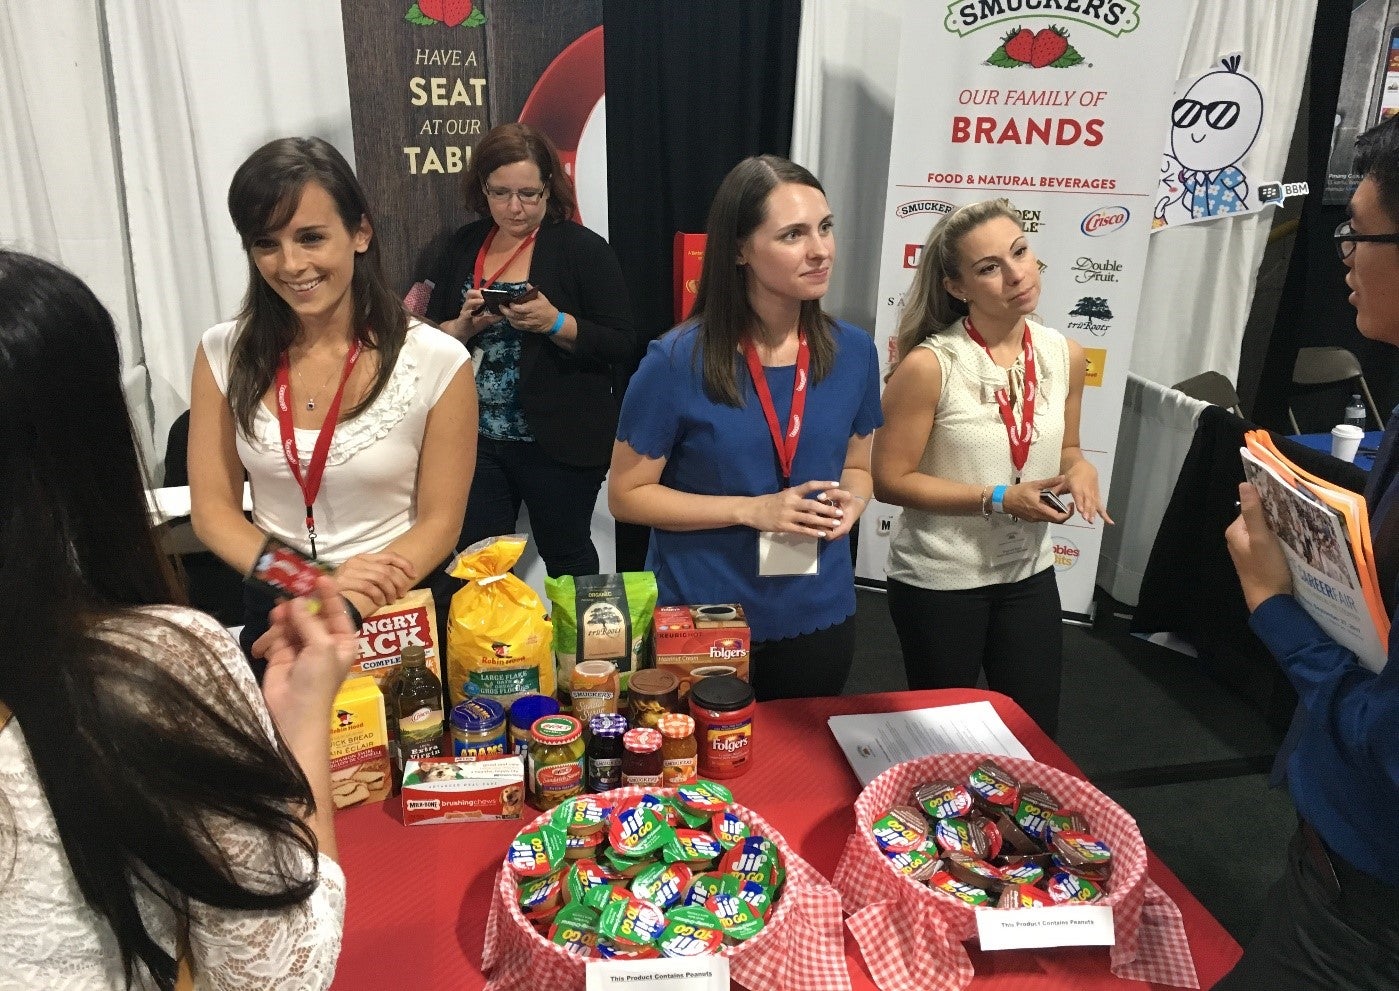 Smuckers booth at career fair